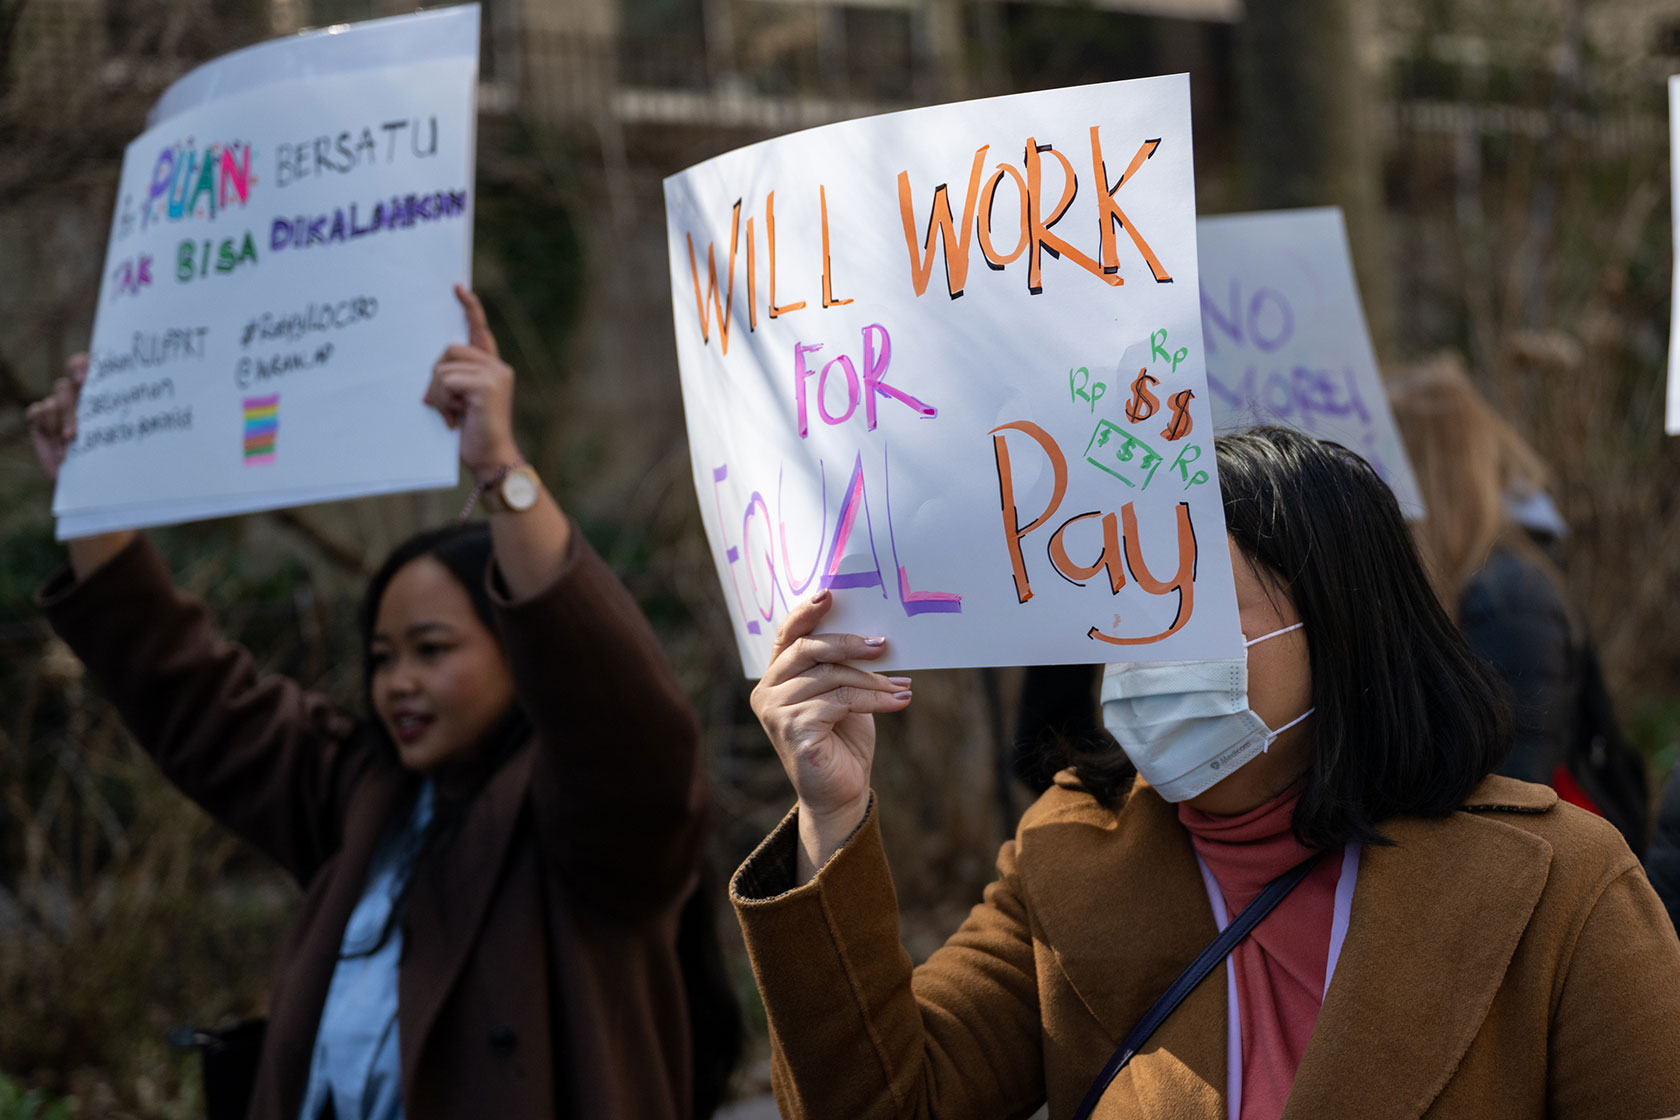 Women of Color and the Wage Gap - Center for American Progress